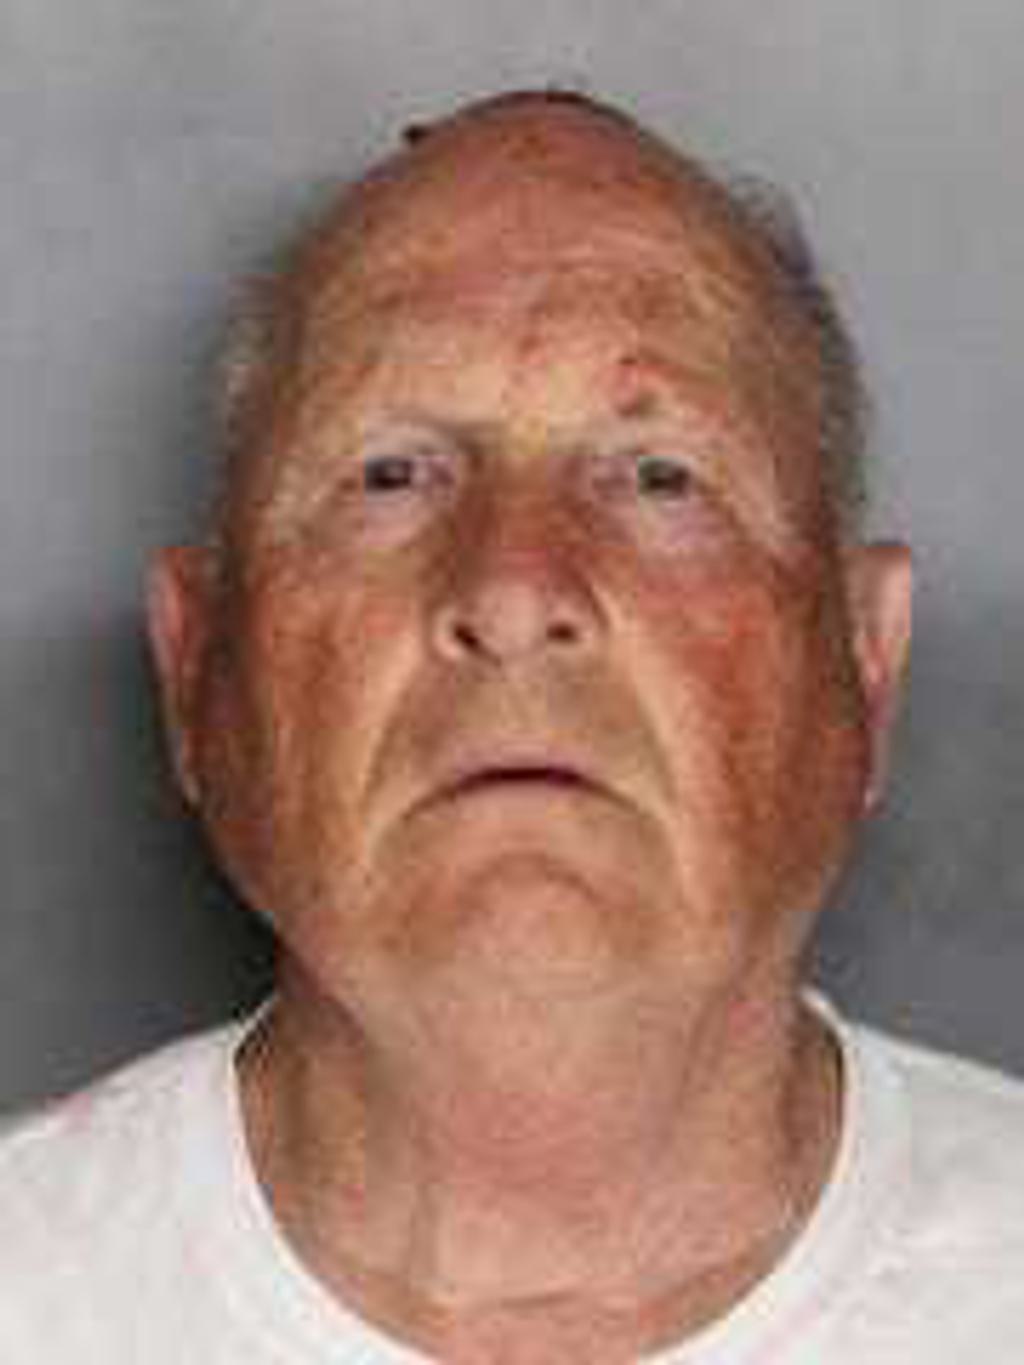 74-Year-Old ‘Golden State Killer’ Joseph DeAngelo Pleads Guilty to 13 Murders and Rapes, Gets 11 Life Sentences